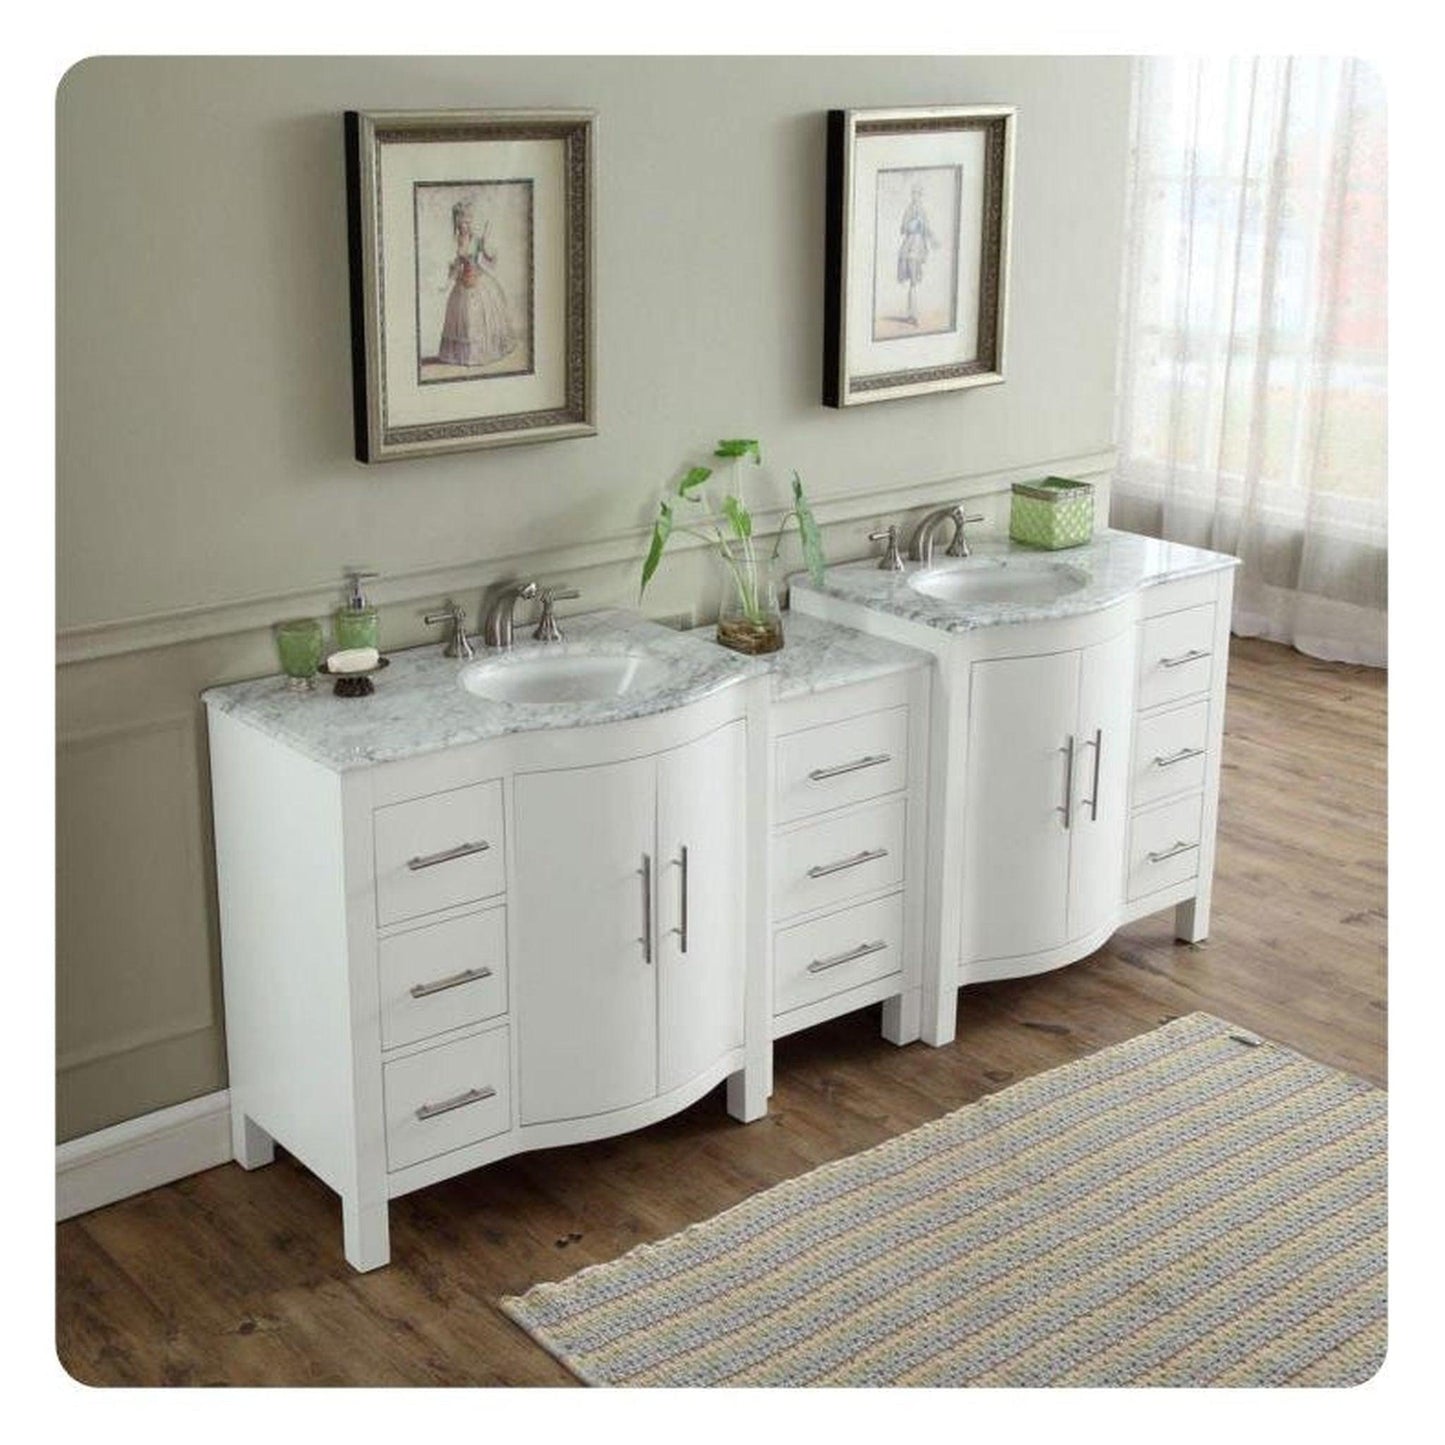 Silkroad Exclusive 89" Double Sink White Bathroom Vanity With Carrara White Marble Countertop and White Ceramic Undermount Sink